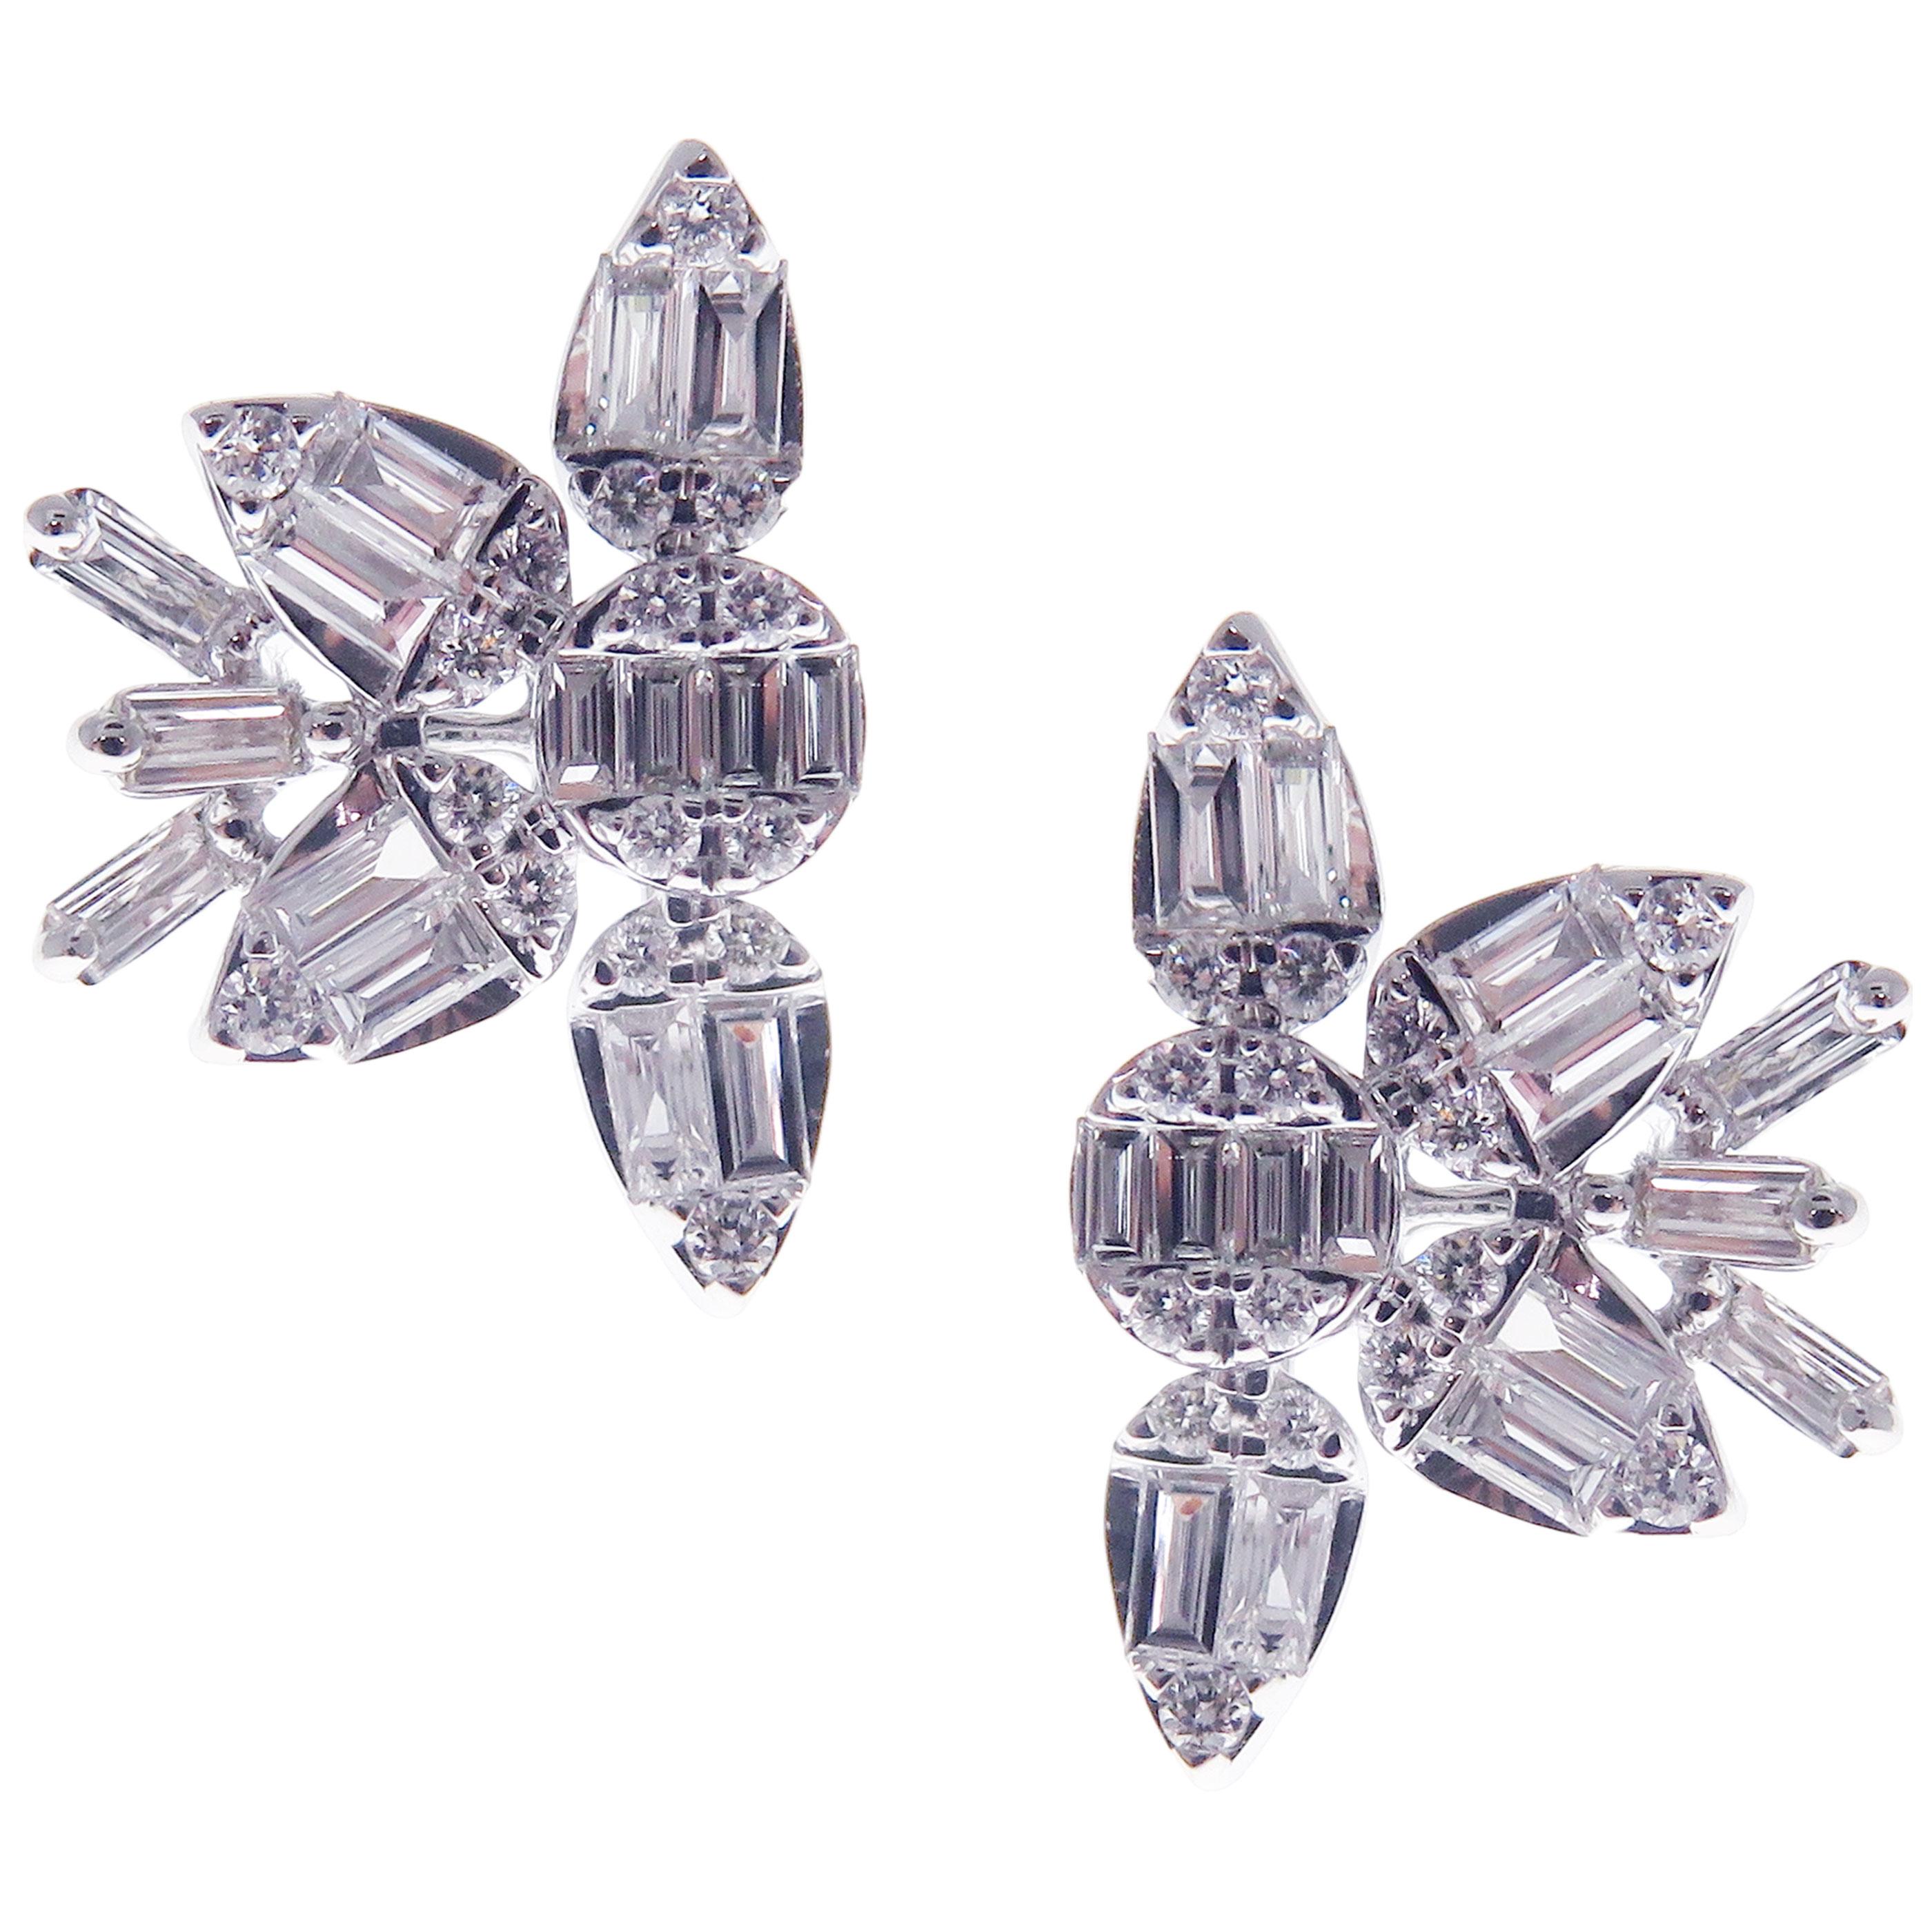 These trendy snowflake inspired stud earrings with multi shapes illusion round and baguette white diamonds are crafted in 18-karat white gold, featuring 32 round white diamonds totaling of 0.17 carats and 30 baguette white diamonds totaling of 0.57